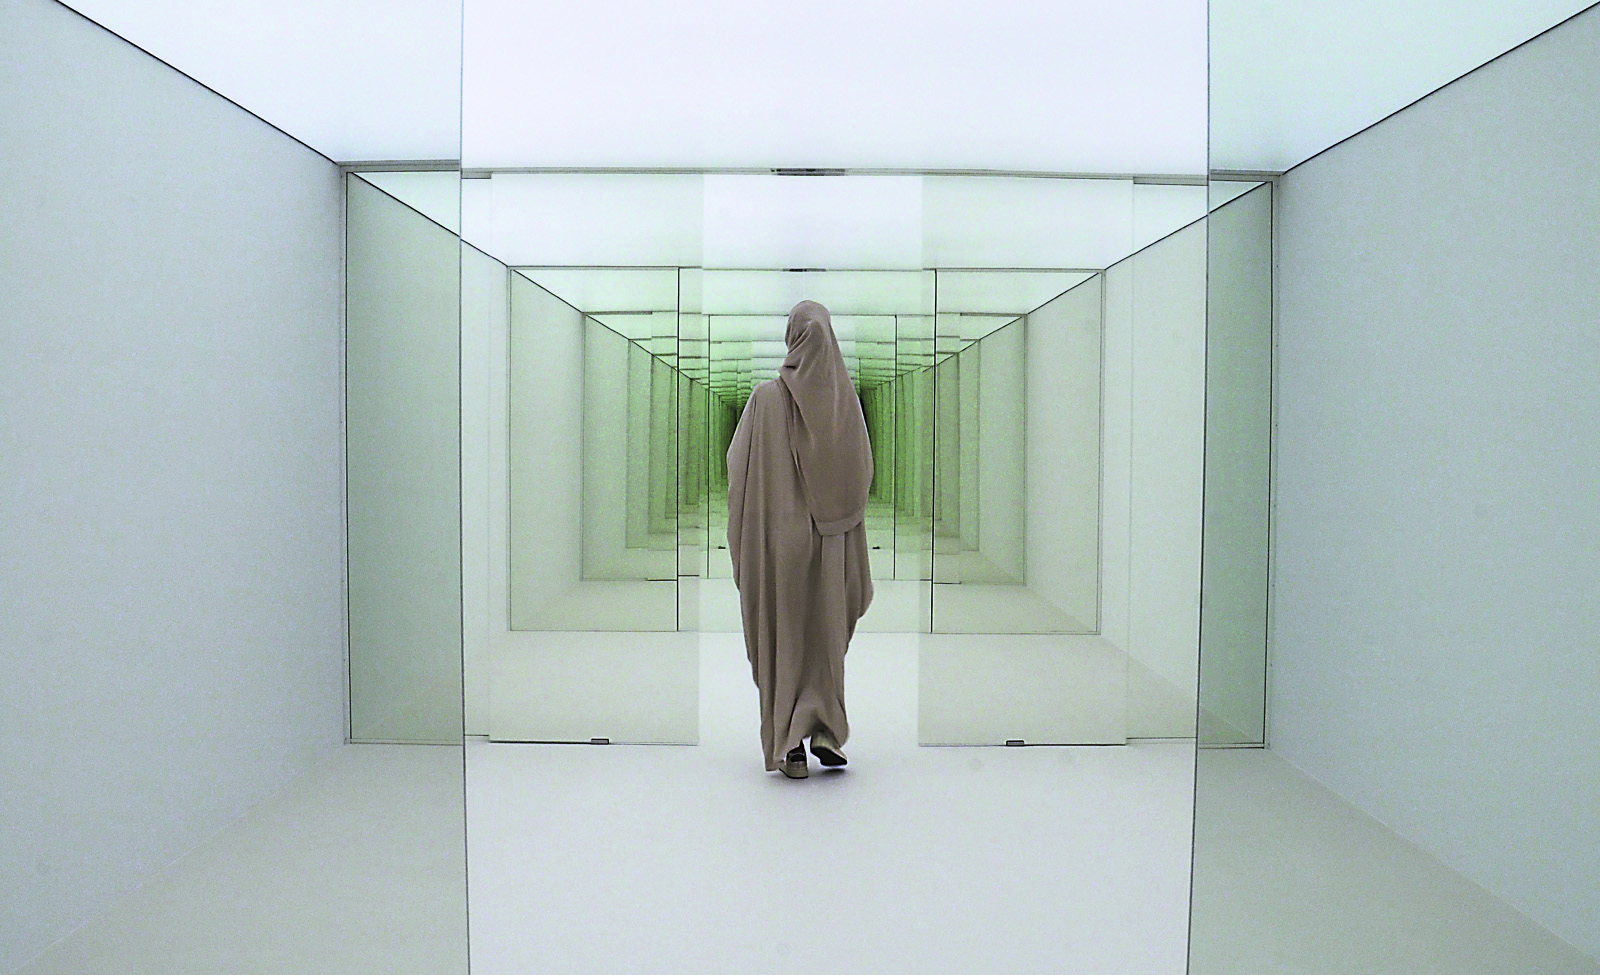 right and opposite Contemporary works by 20 artists, including “Future Thoughts,” by Italian artist Esther Stocker, and “Six Sliding Doors,” by Carsten Höller, comprised the 2021 exhibition Seeing and Perceiving at Ithra in Dhahran, lower, where the arts and cultural center’s architecture has itself earned regional and global recognition. 